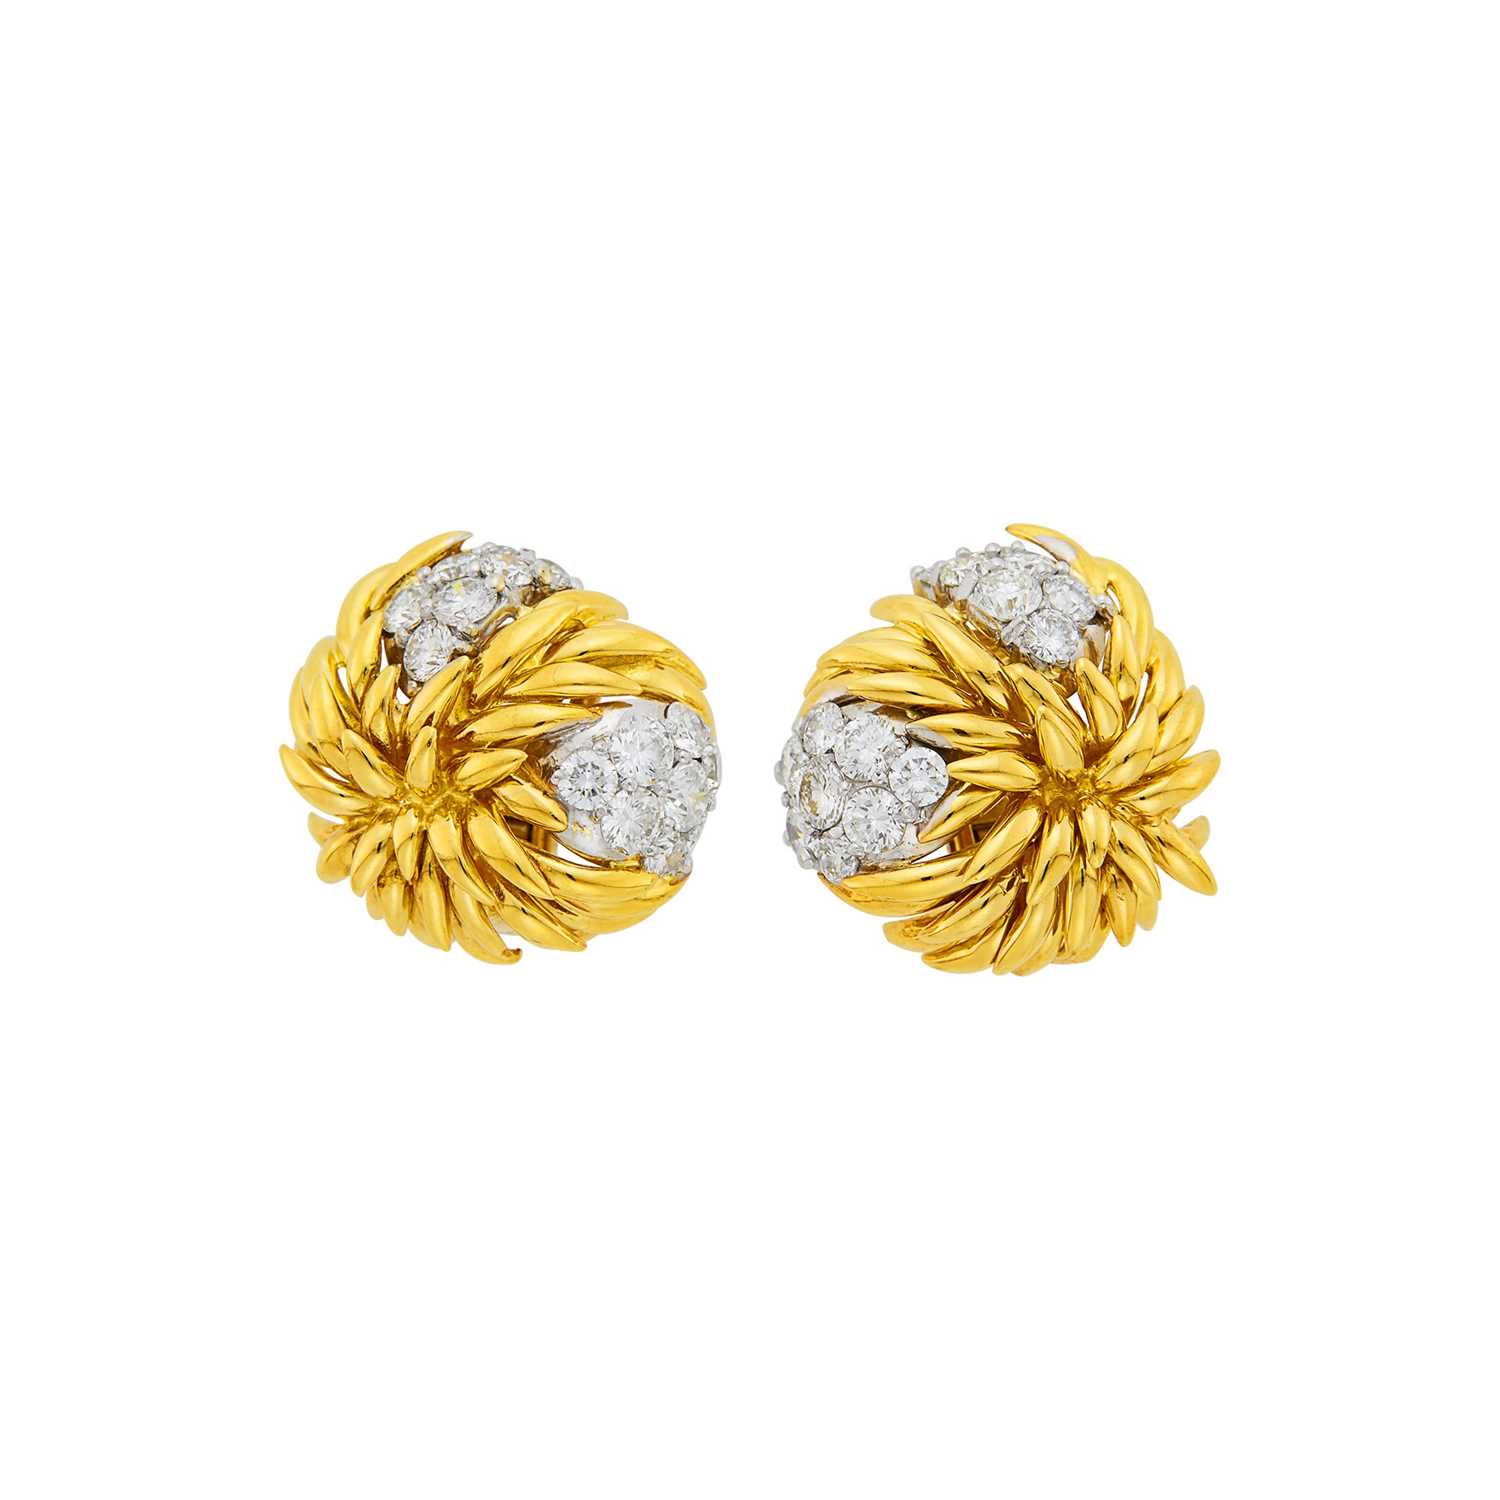 Lot 106 - Pair of Two-Color Gold and Diamond Earclips